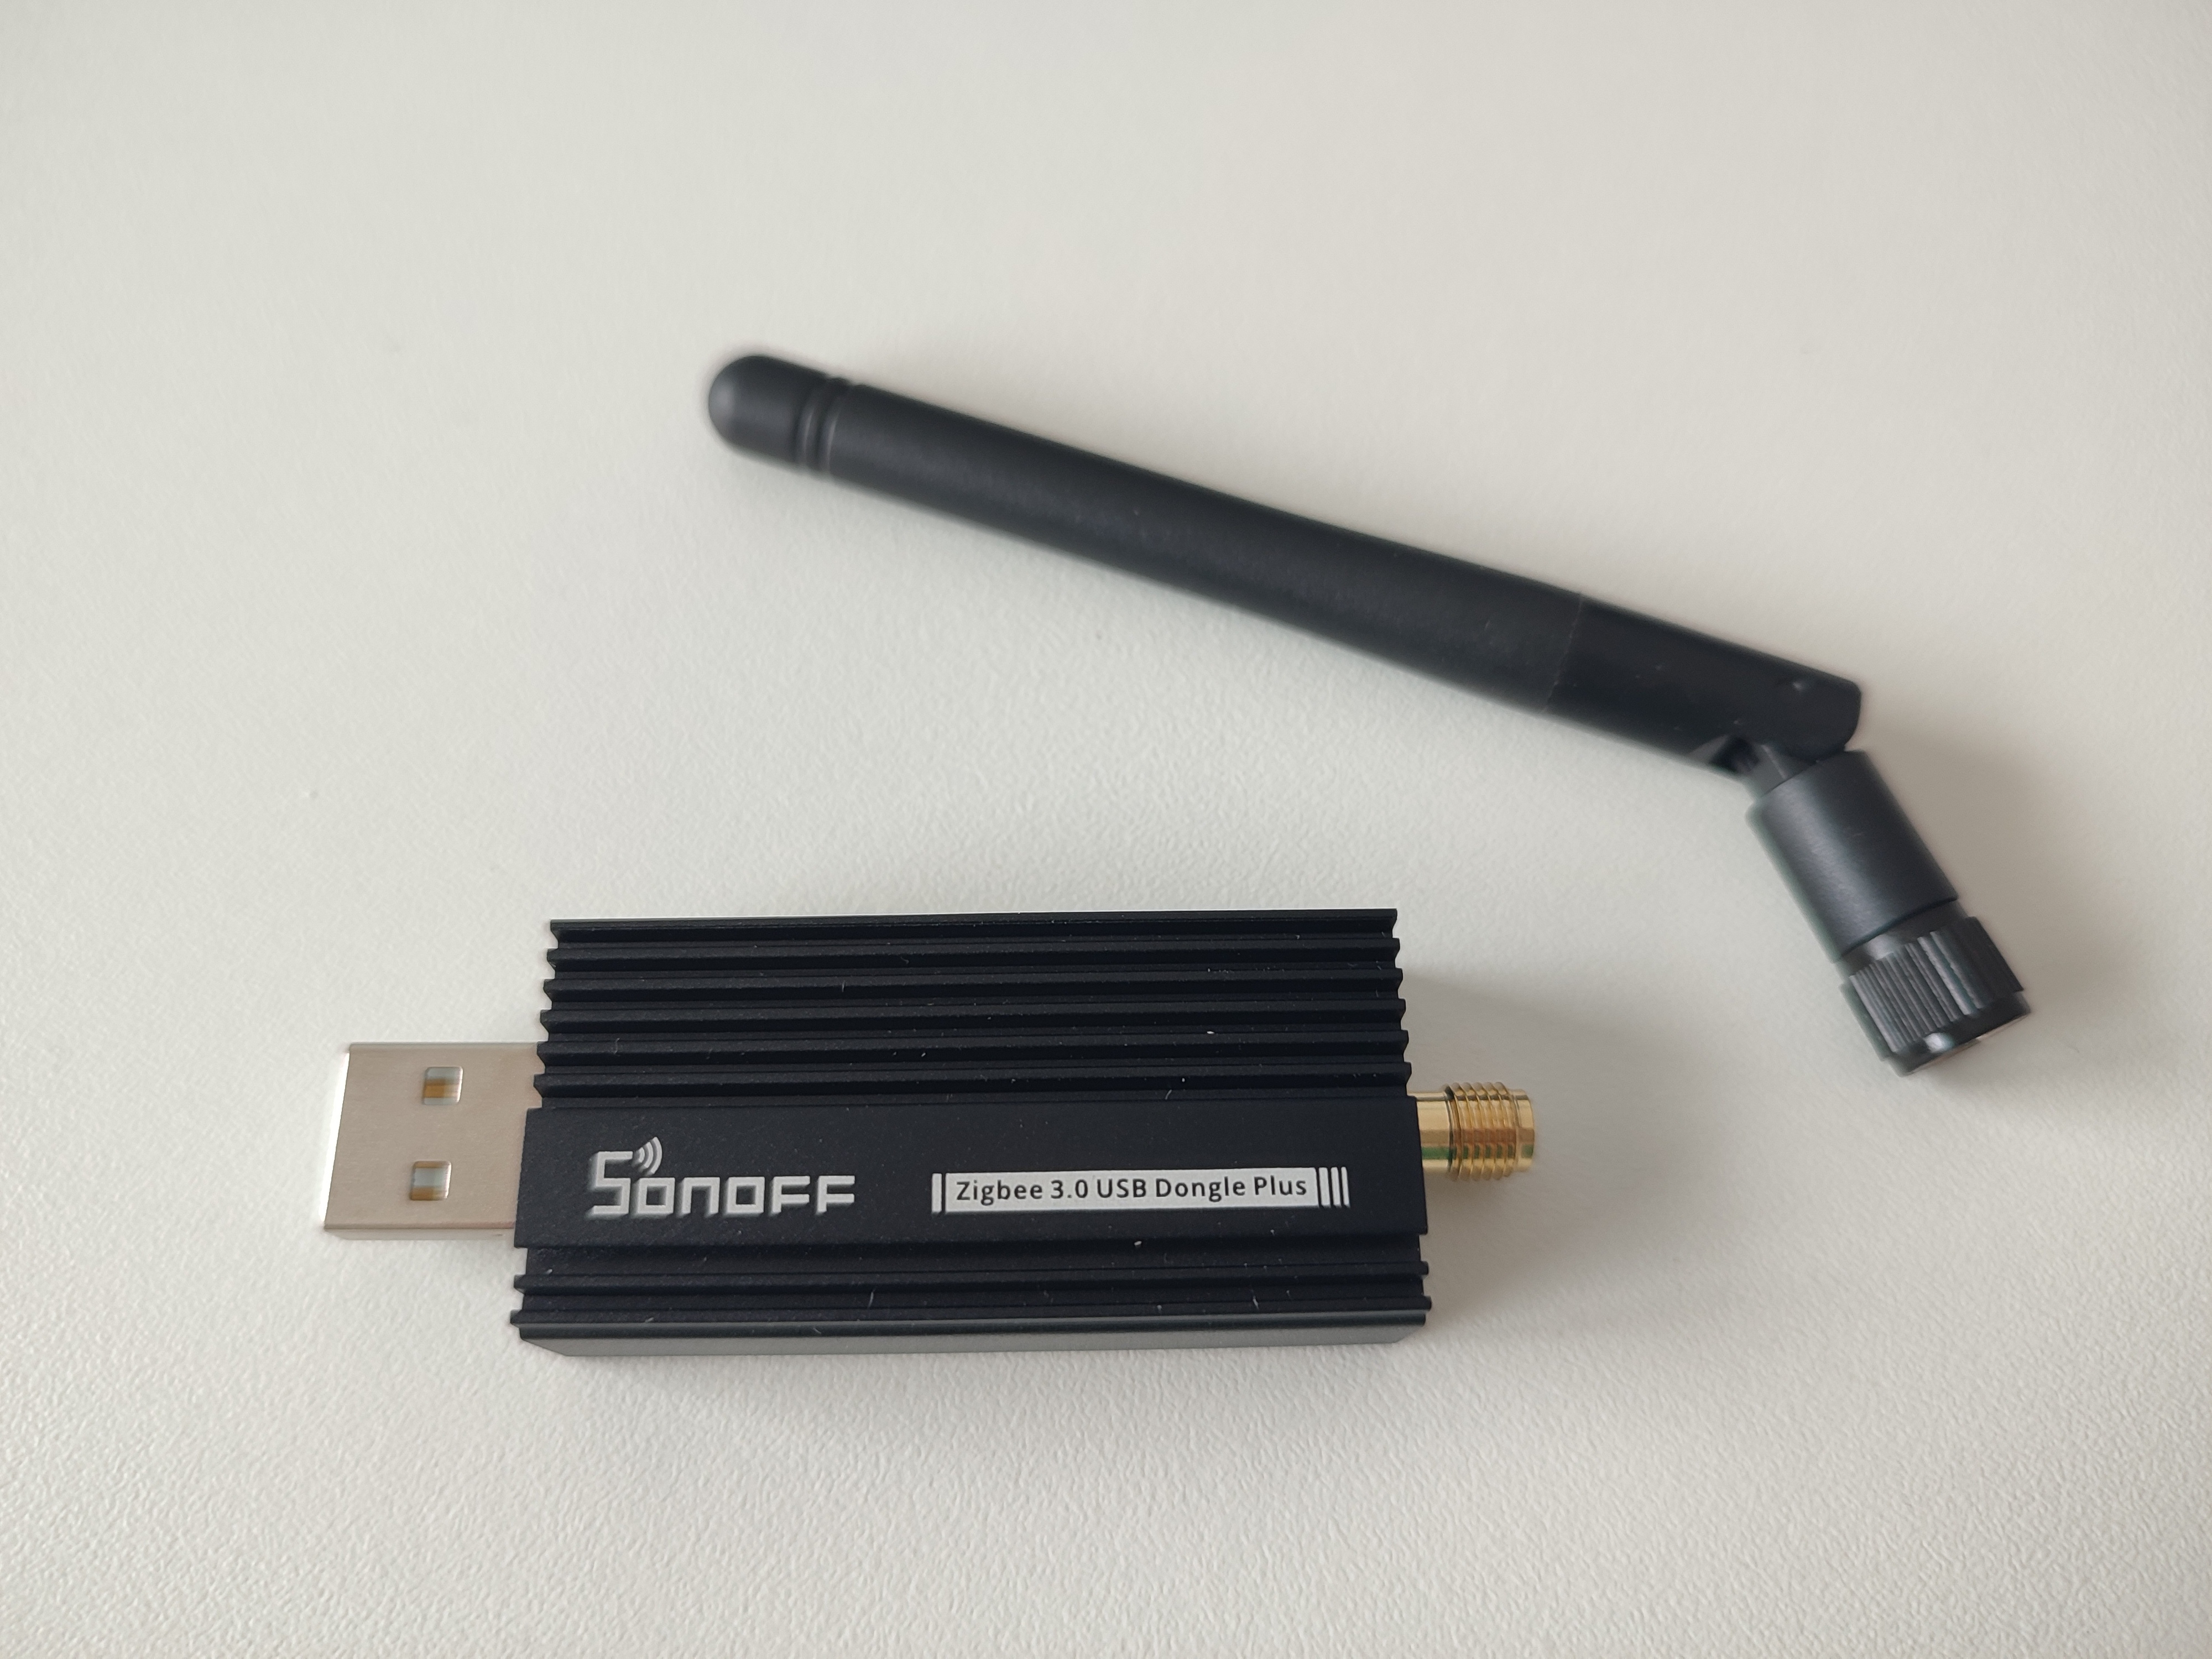 How to: Flash SonOff USB Dongle to be a Zigbee Repeater/Router